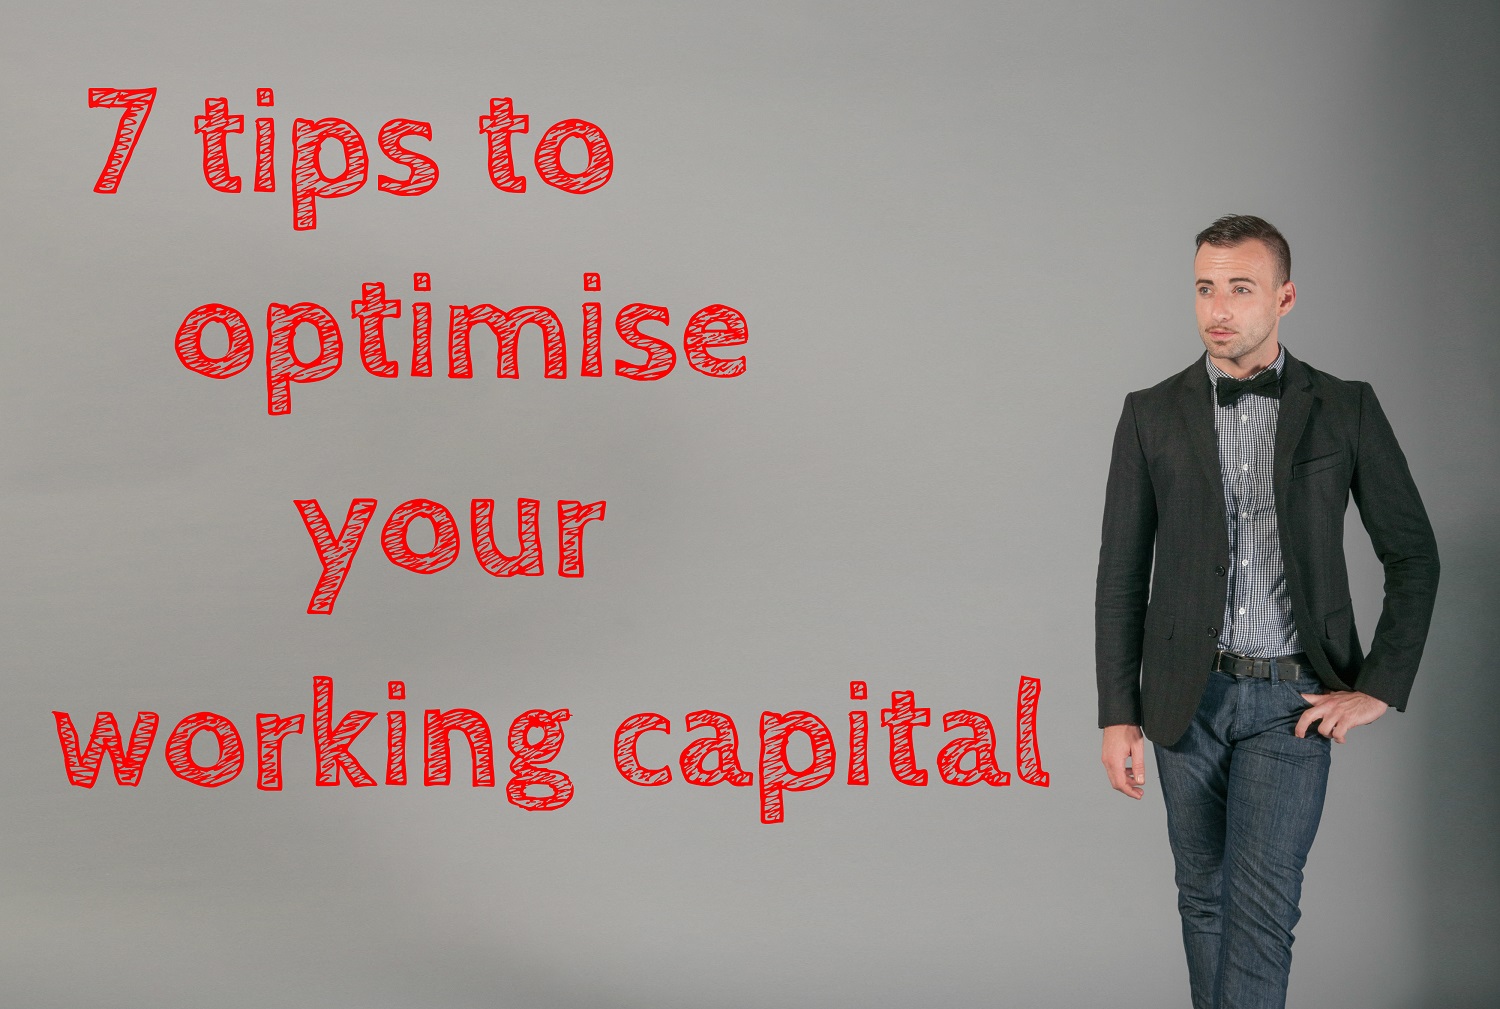 7 tips to optimise your working capital